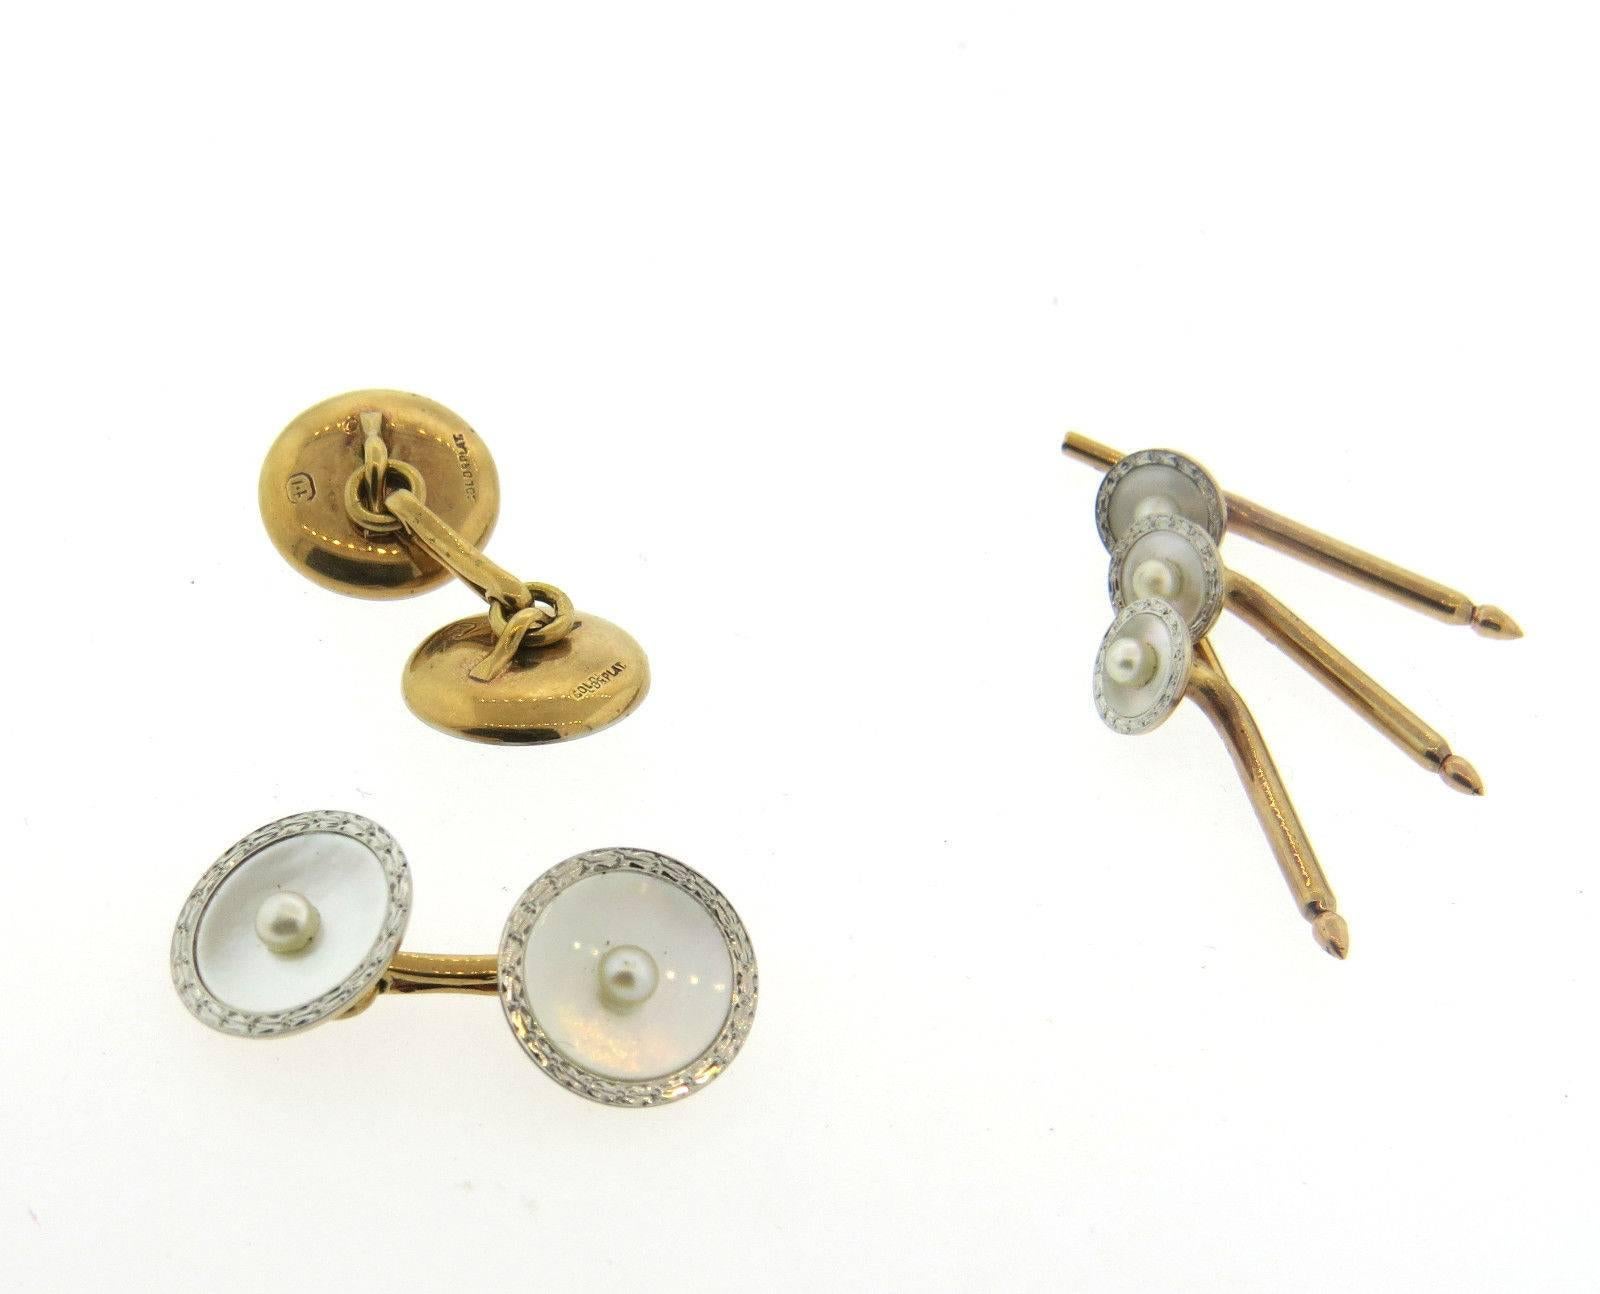 A set of 14k gold and platinum cufflinks and stud set adorned with pearls. Cufflink tops measure 14mm in diameter, and the stud tops are 8mm in diameter.  Marked: 14k, gold, plat.  The weight of the set is 12 grams.